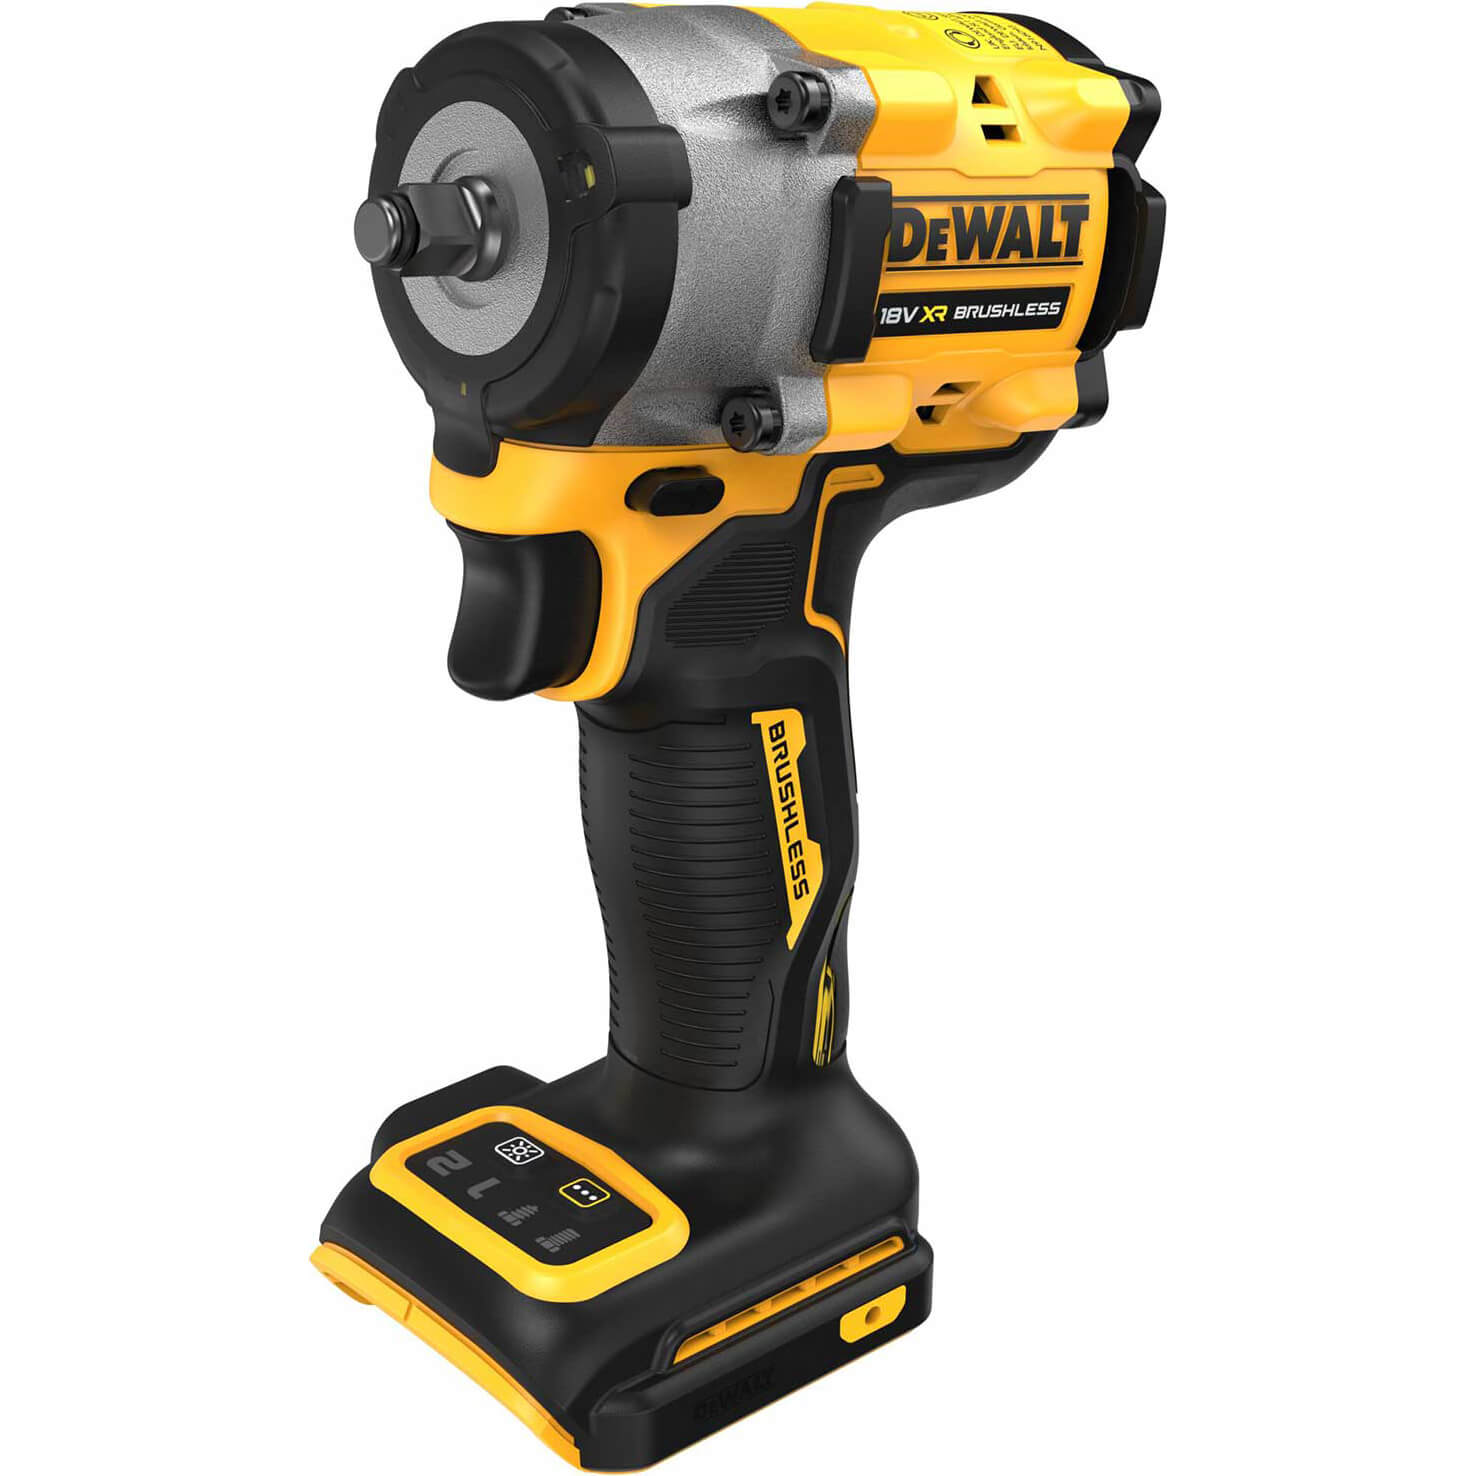 Image of DeWalt DCF923 18v XR Cordless Brushless 3/8" Compact Impact Wrench No Batteries No Charger No Case